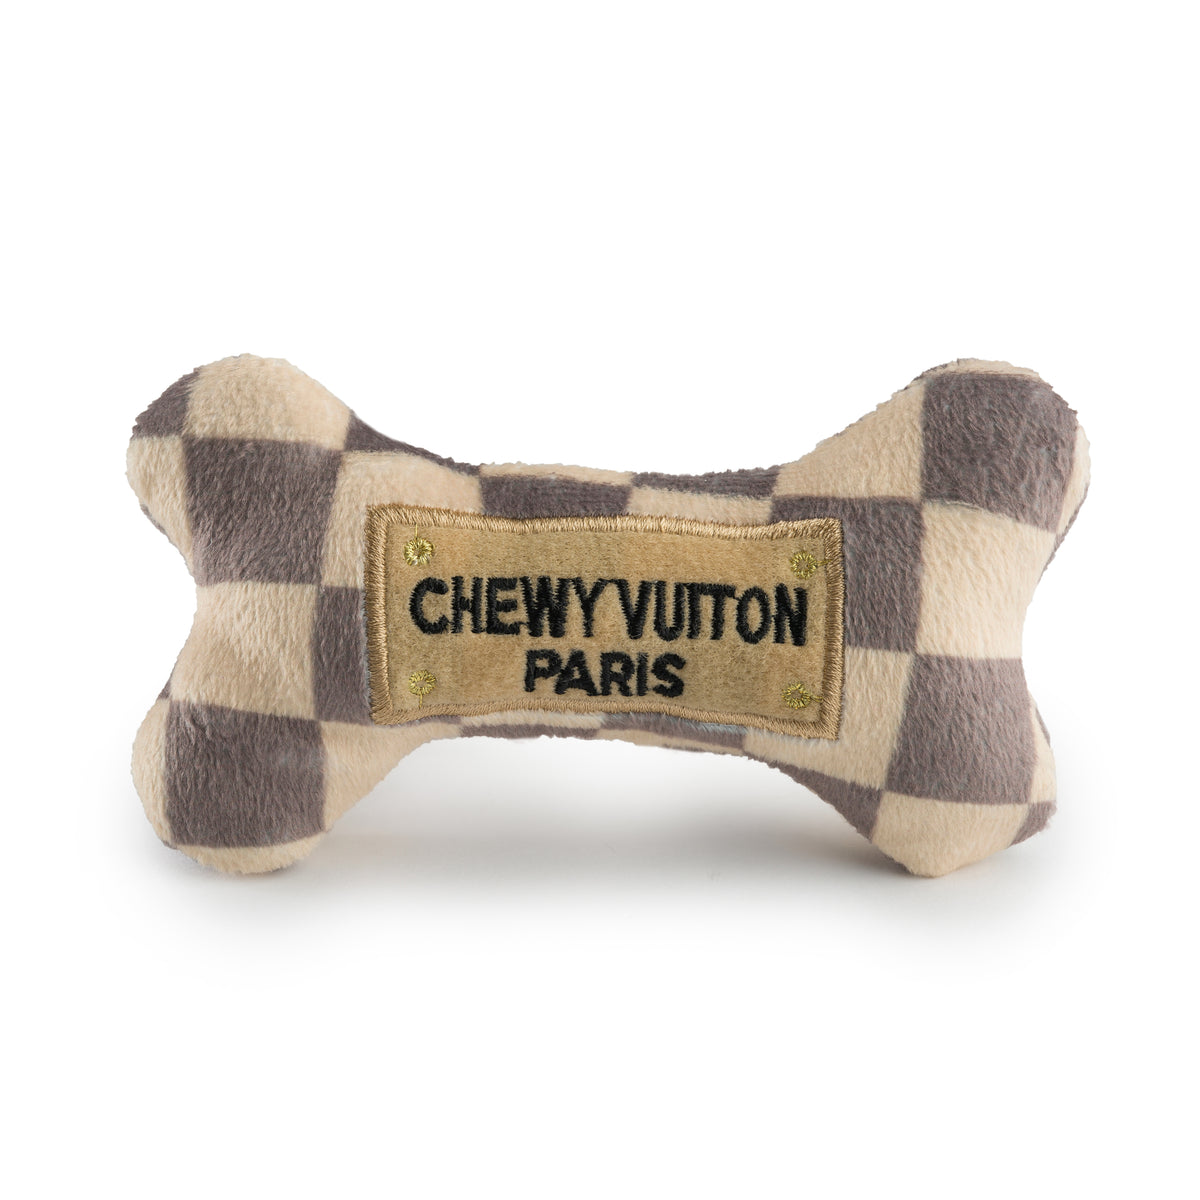 Haute Diggity Dog Checker Chewy Vuiton Loafer Dog Toy - Black